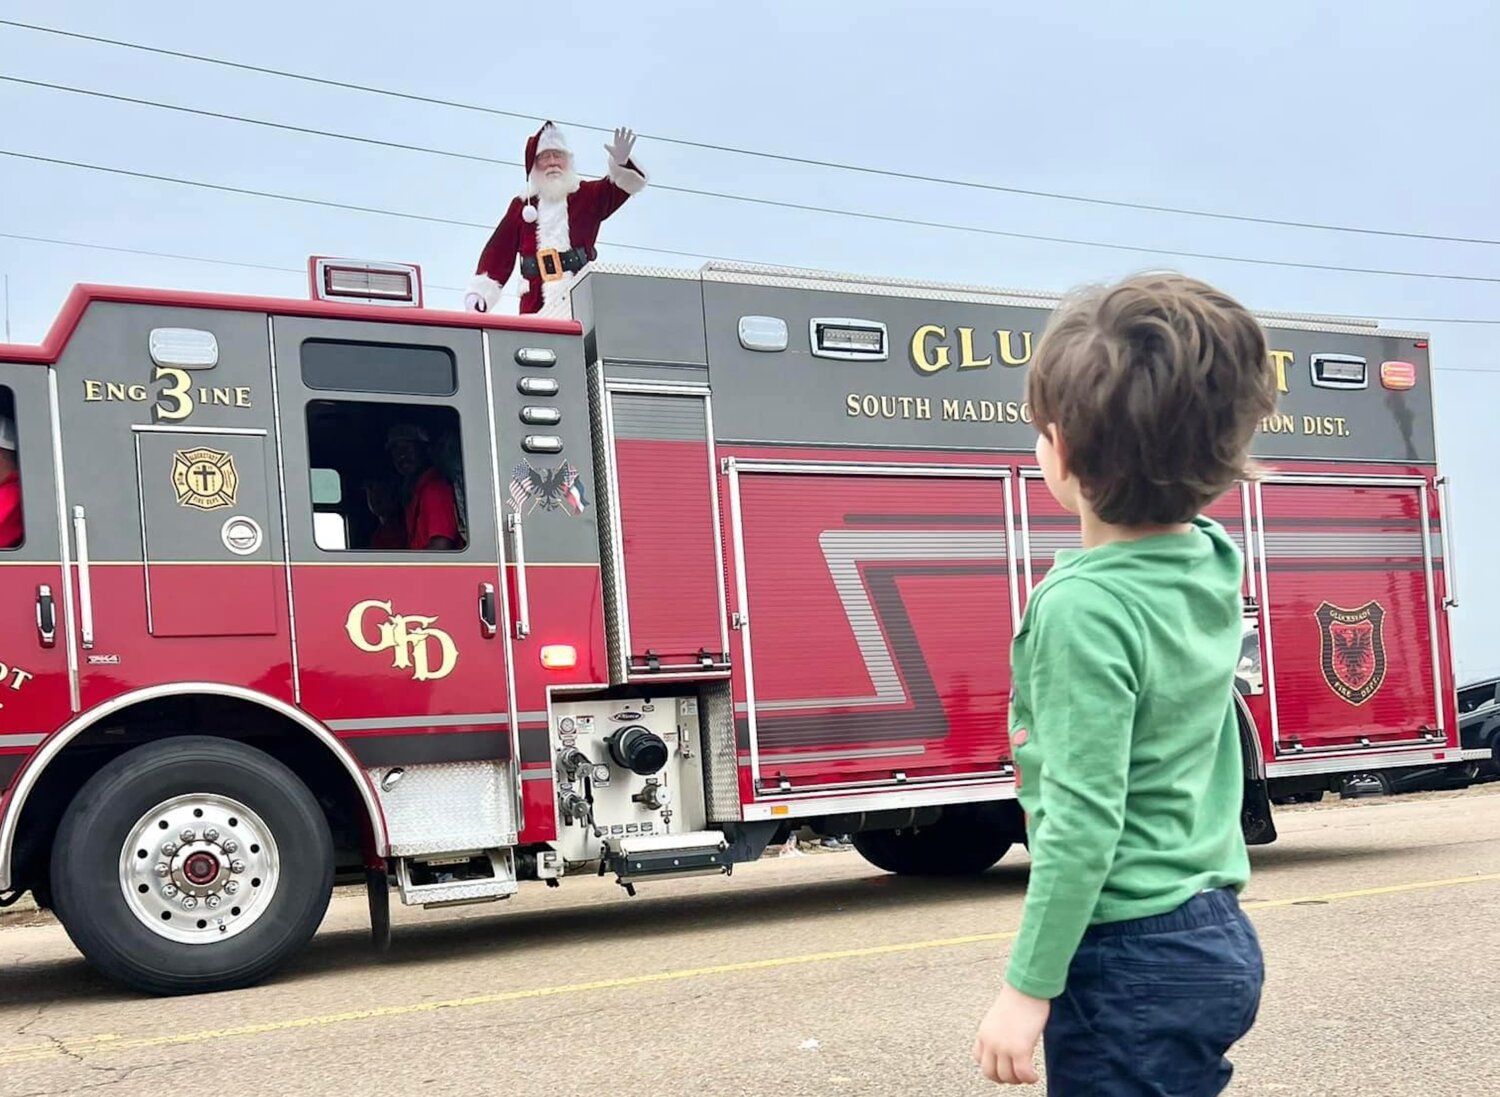 Santa Claus made a special appearance at the 2022 Gluckstadt Christmas Parade, riding with the Gluckstadt Fire Department.